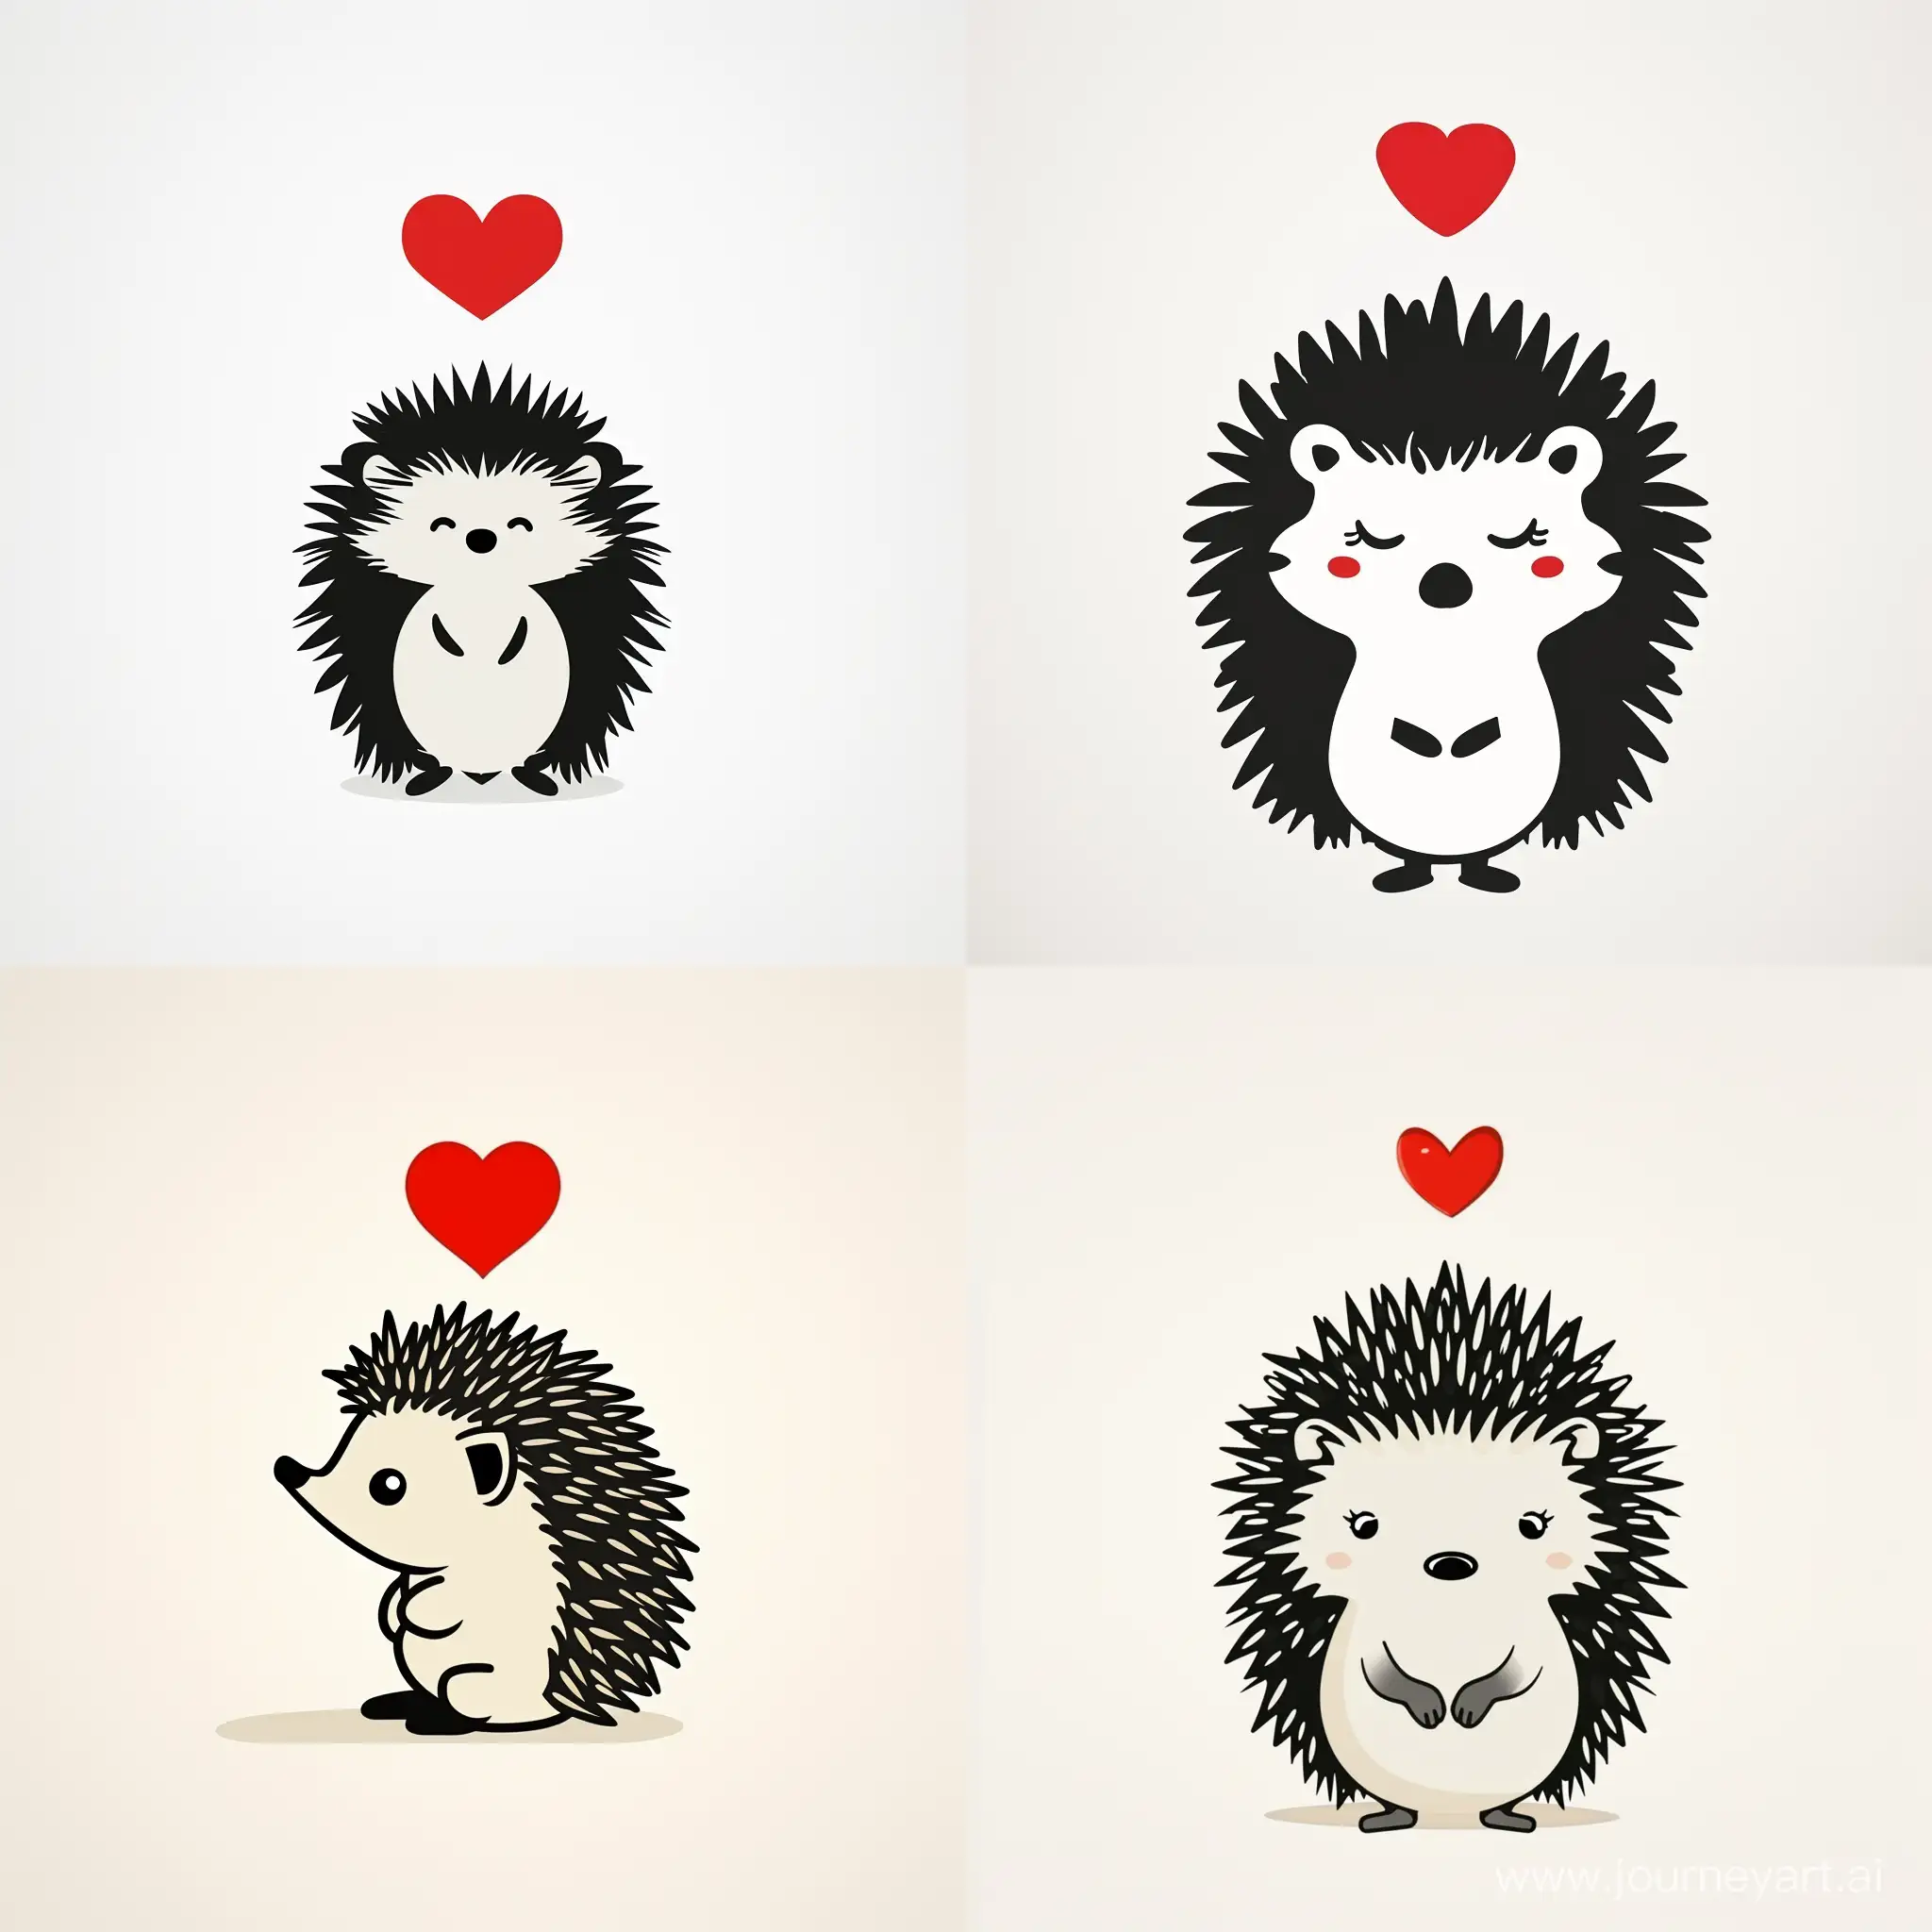 Adorable-Cartoon-Hedgehog-with-Heart-Symbol-on-White-Background